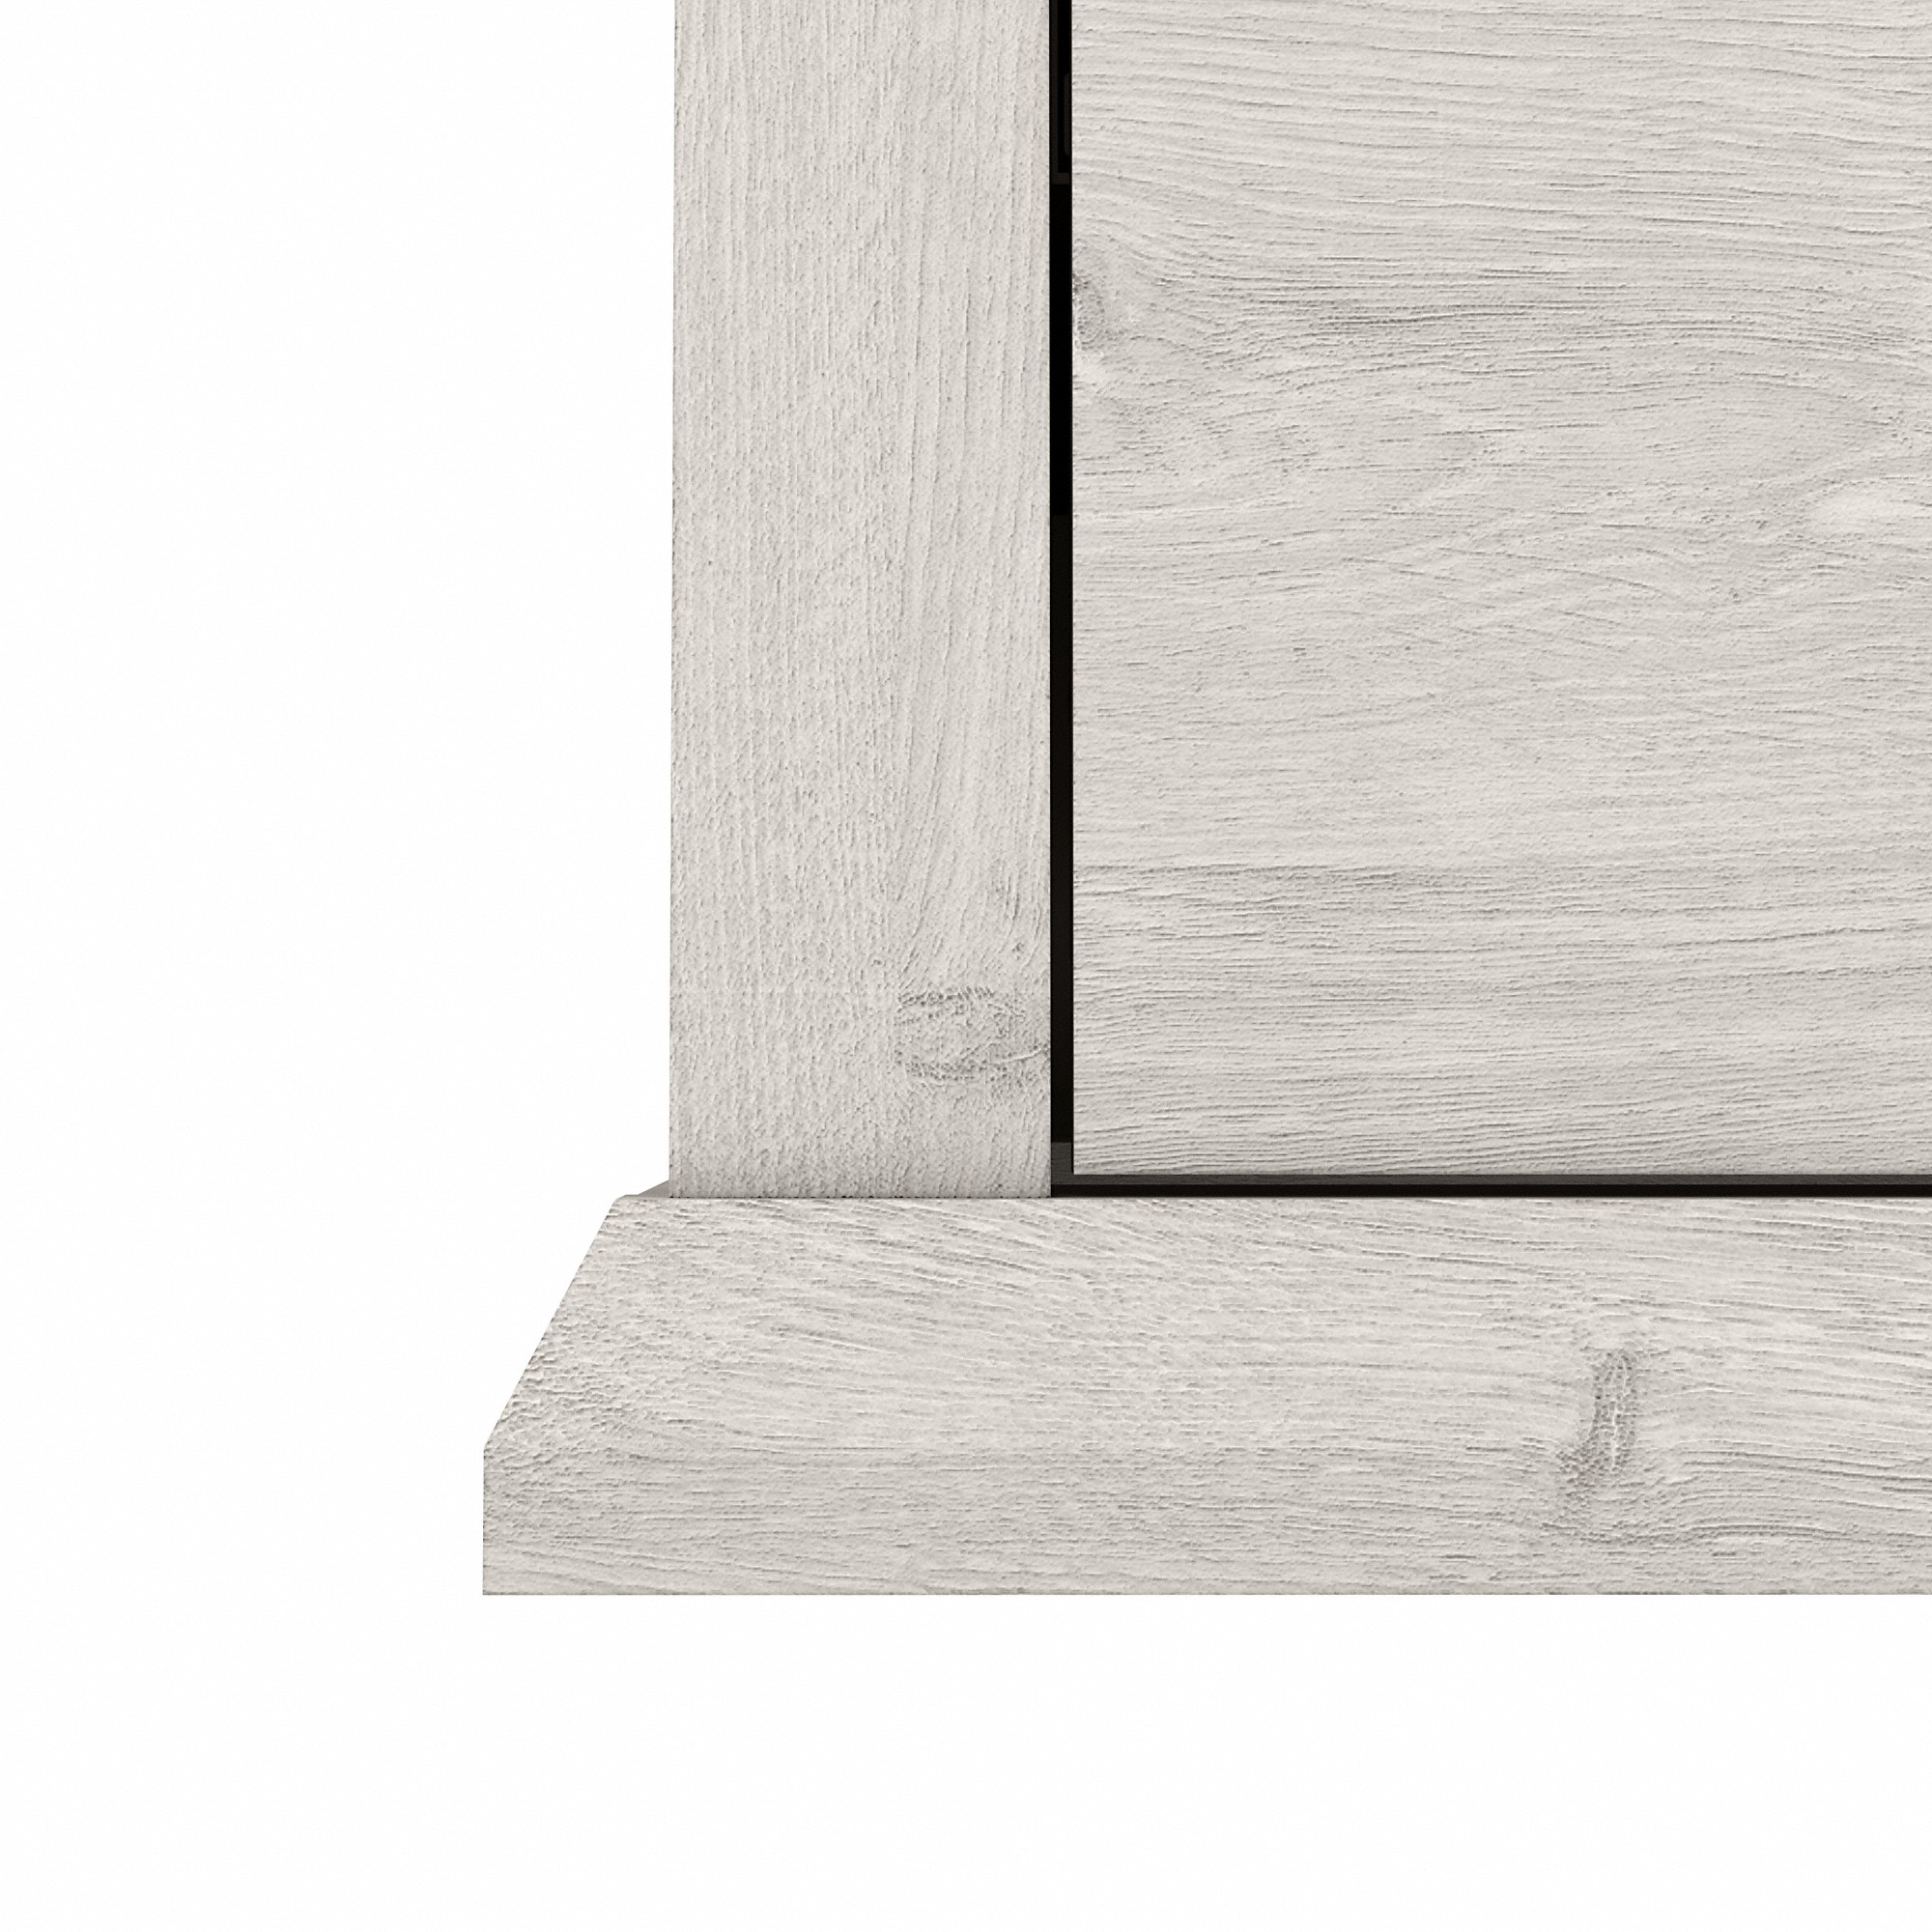 Yorktown 2 Drawer Lateral File Cabinet in Linen White Oak - image 2 of 7